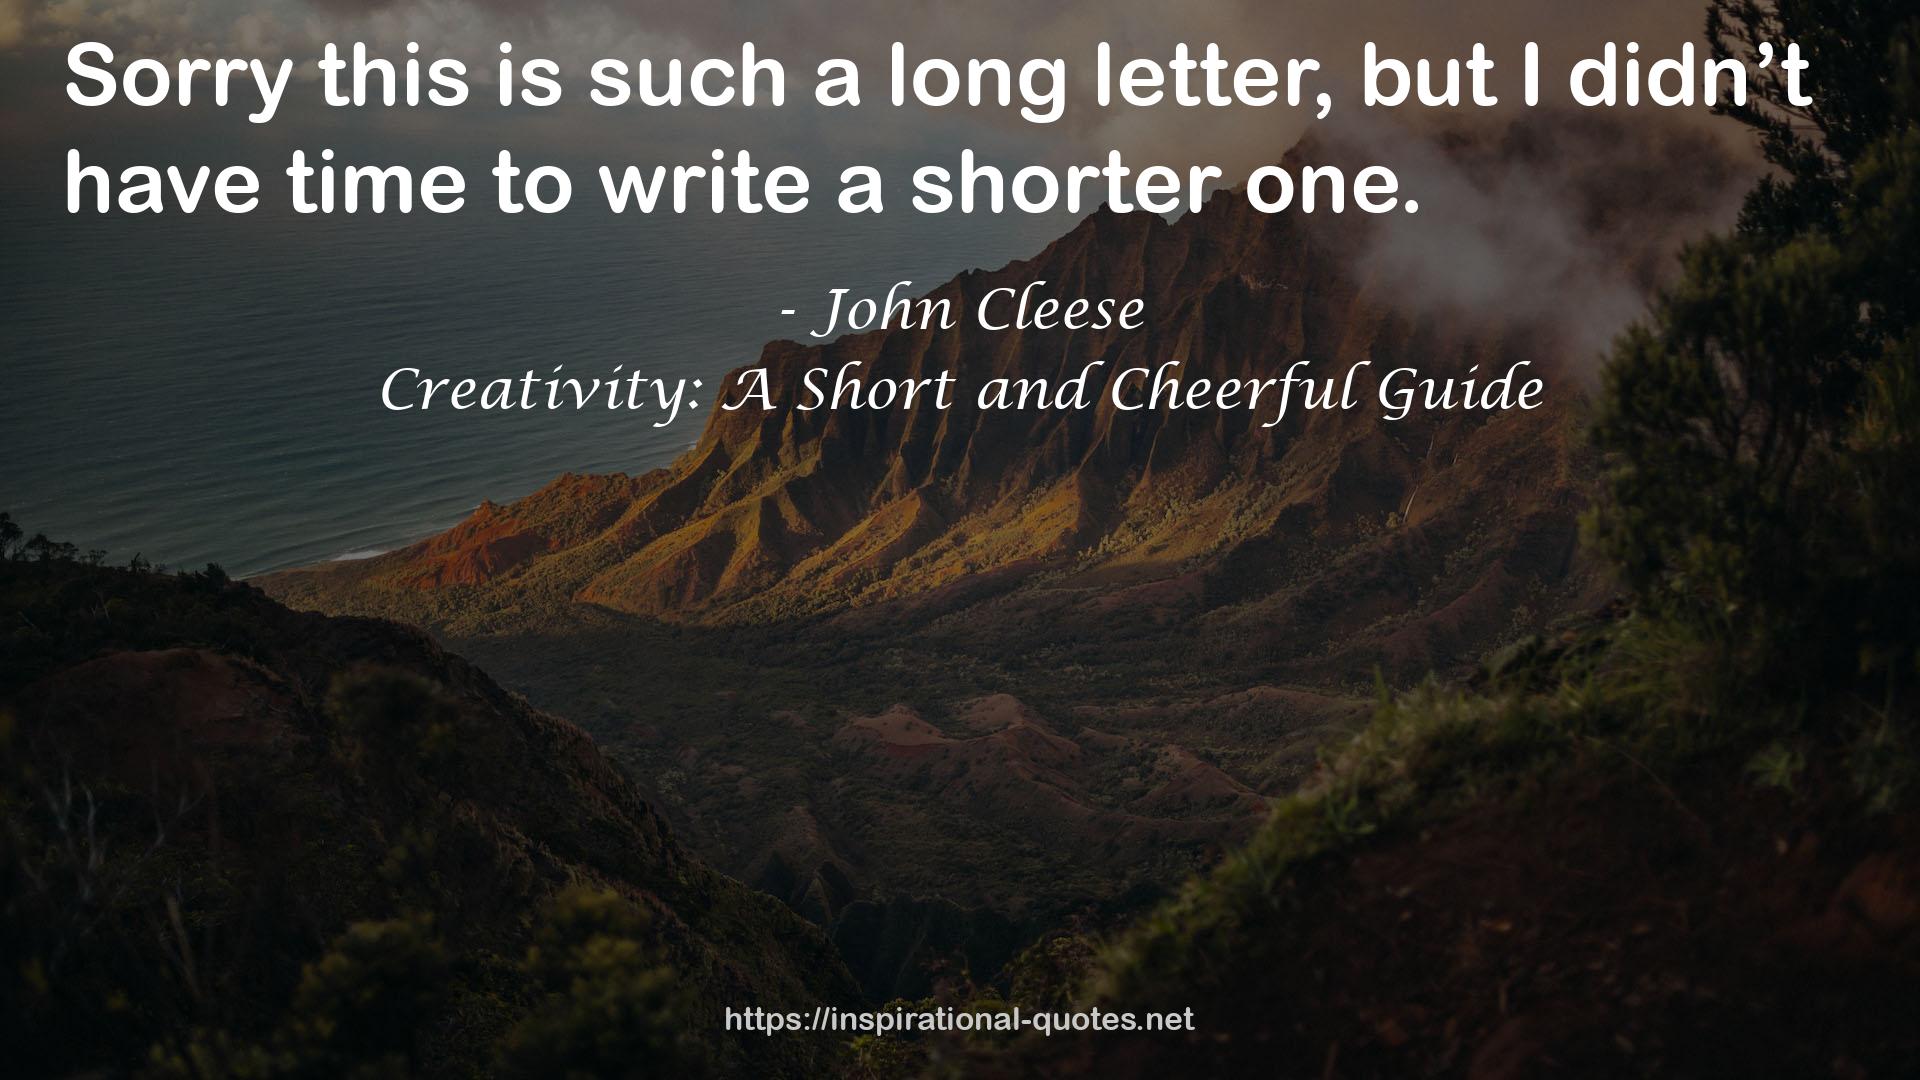 Creativity: A Short and Cheerful Guide QUOTES